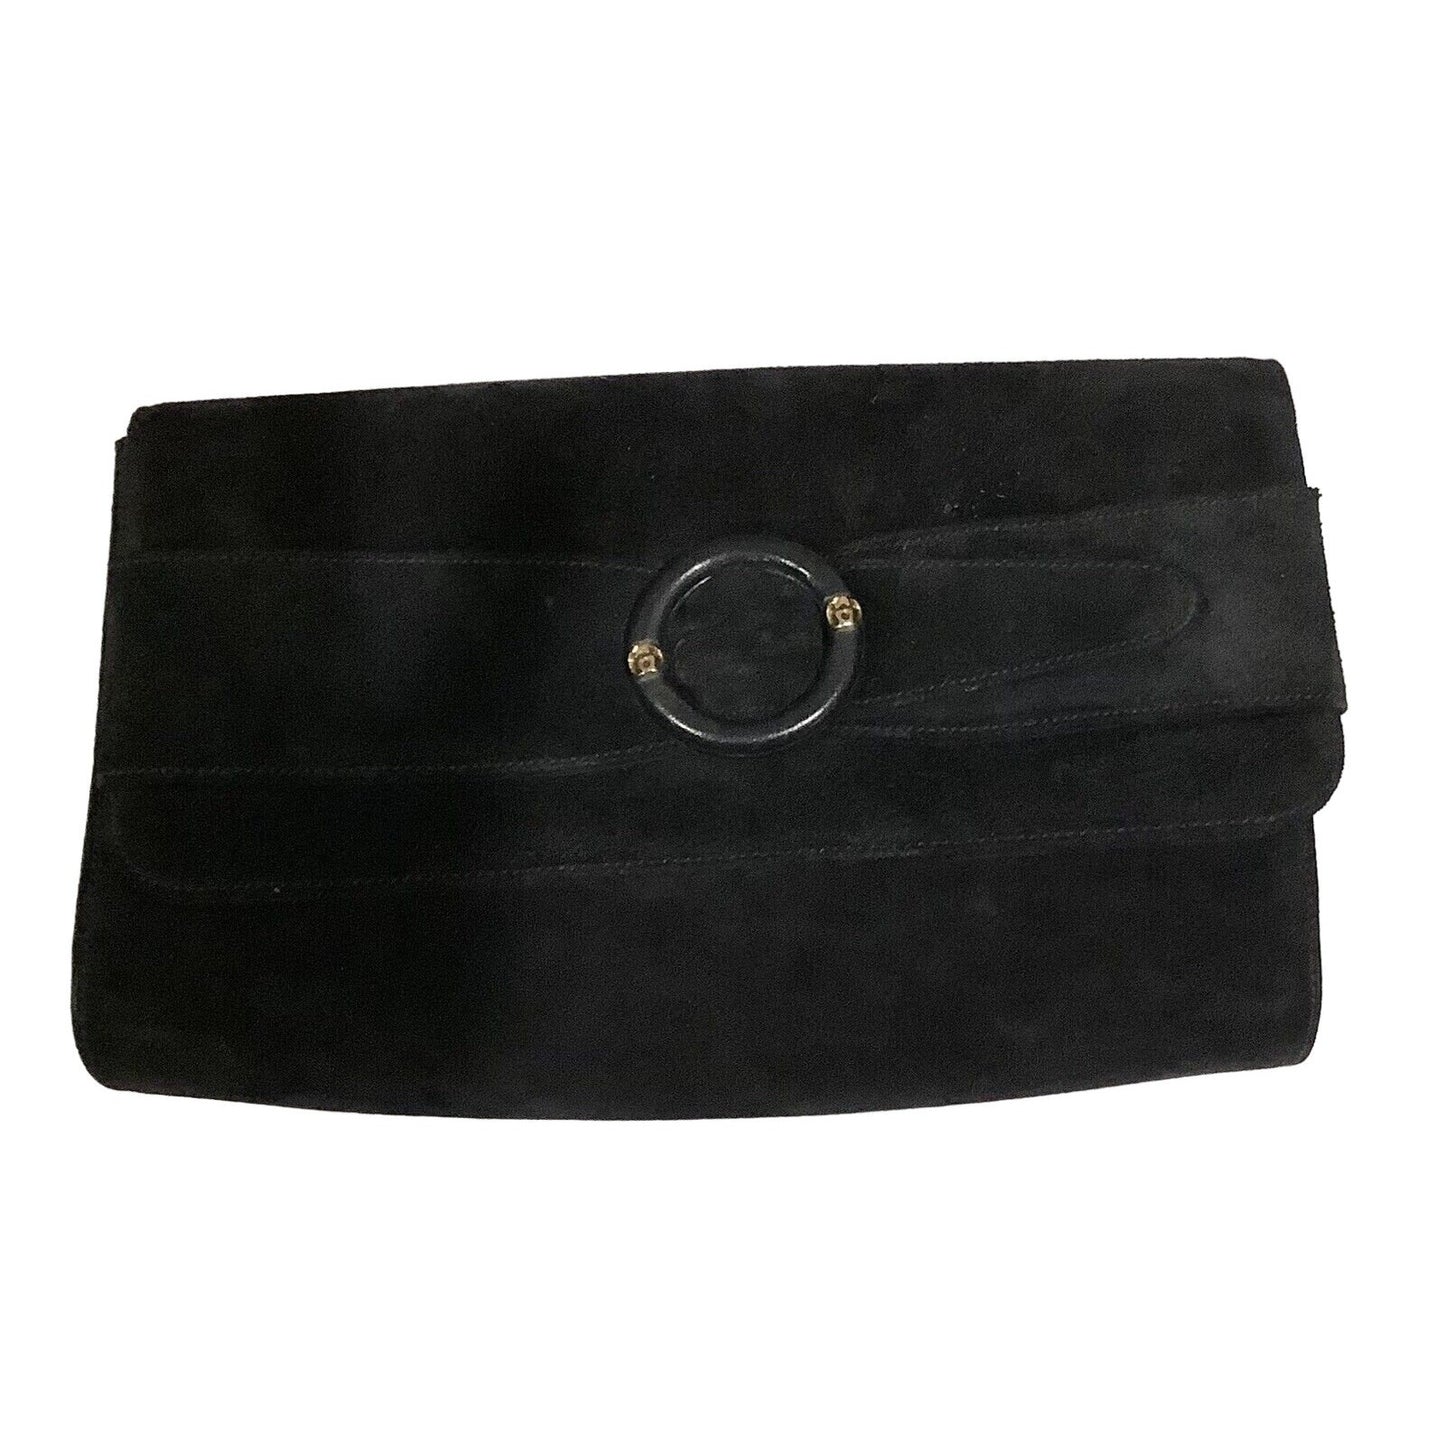 Gucci navy suede clutch w a round buckle accent